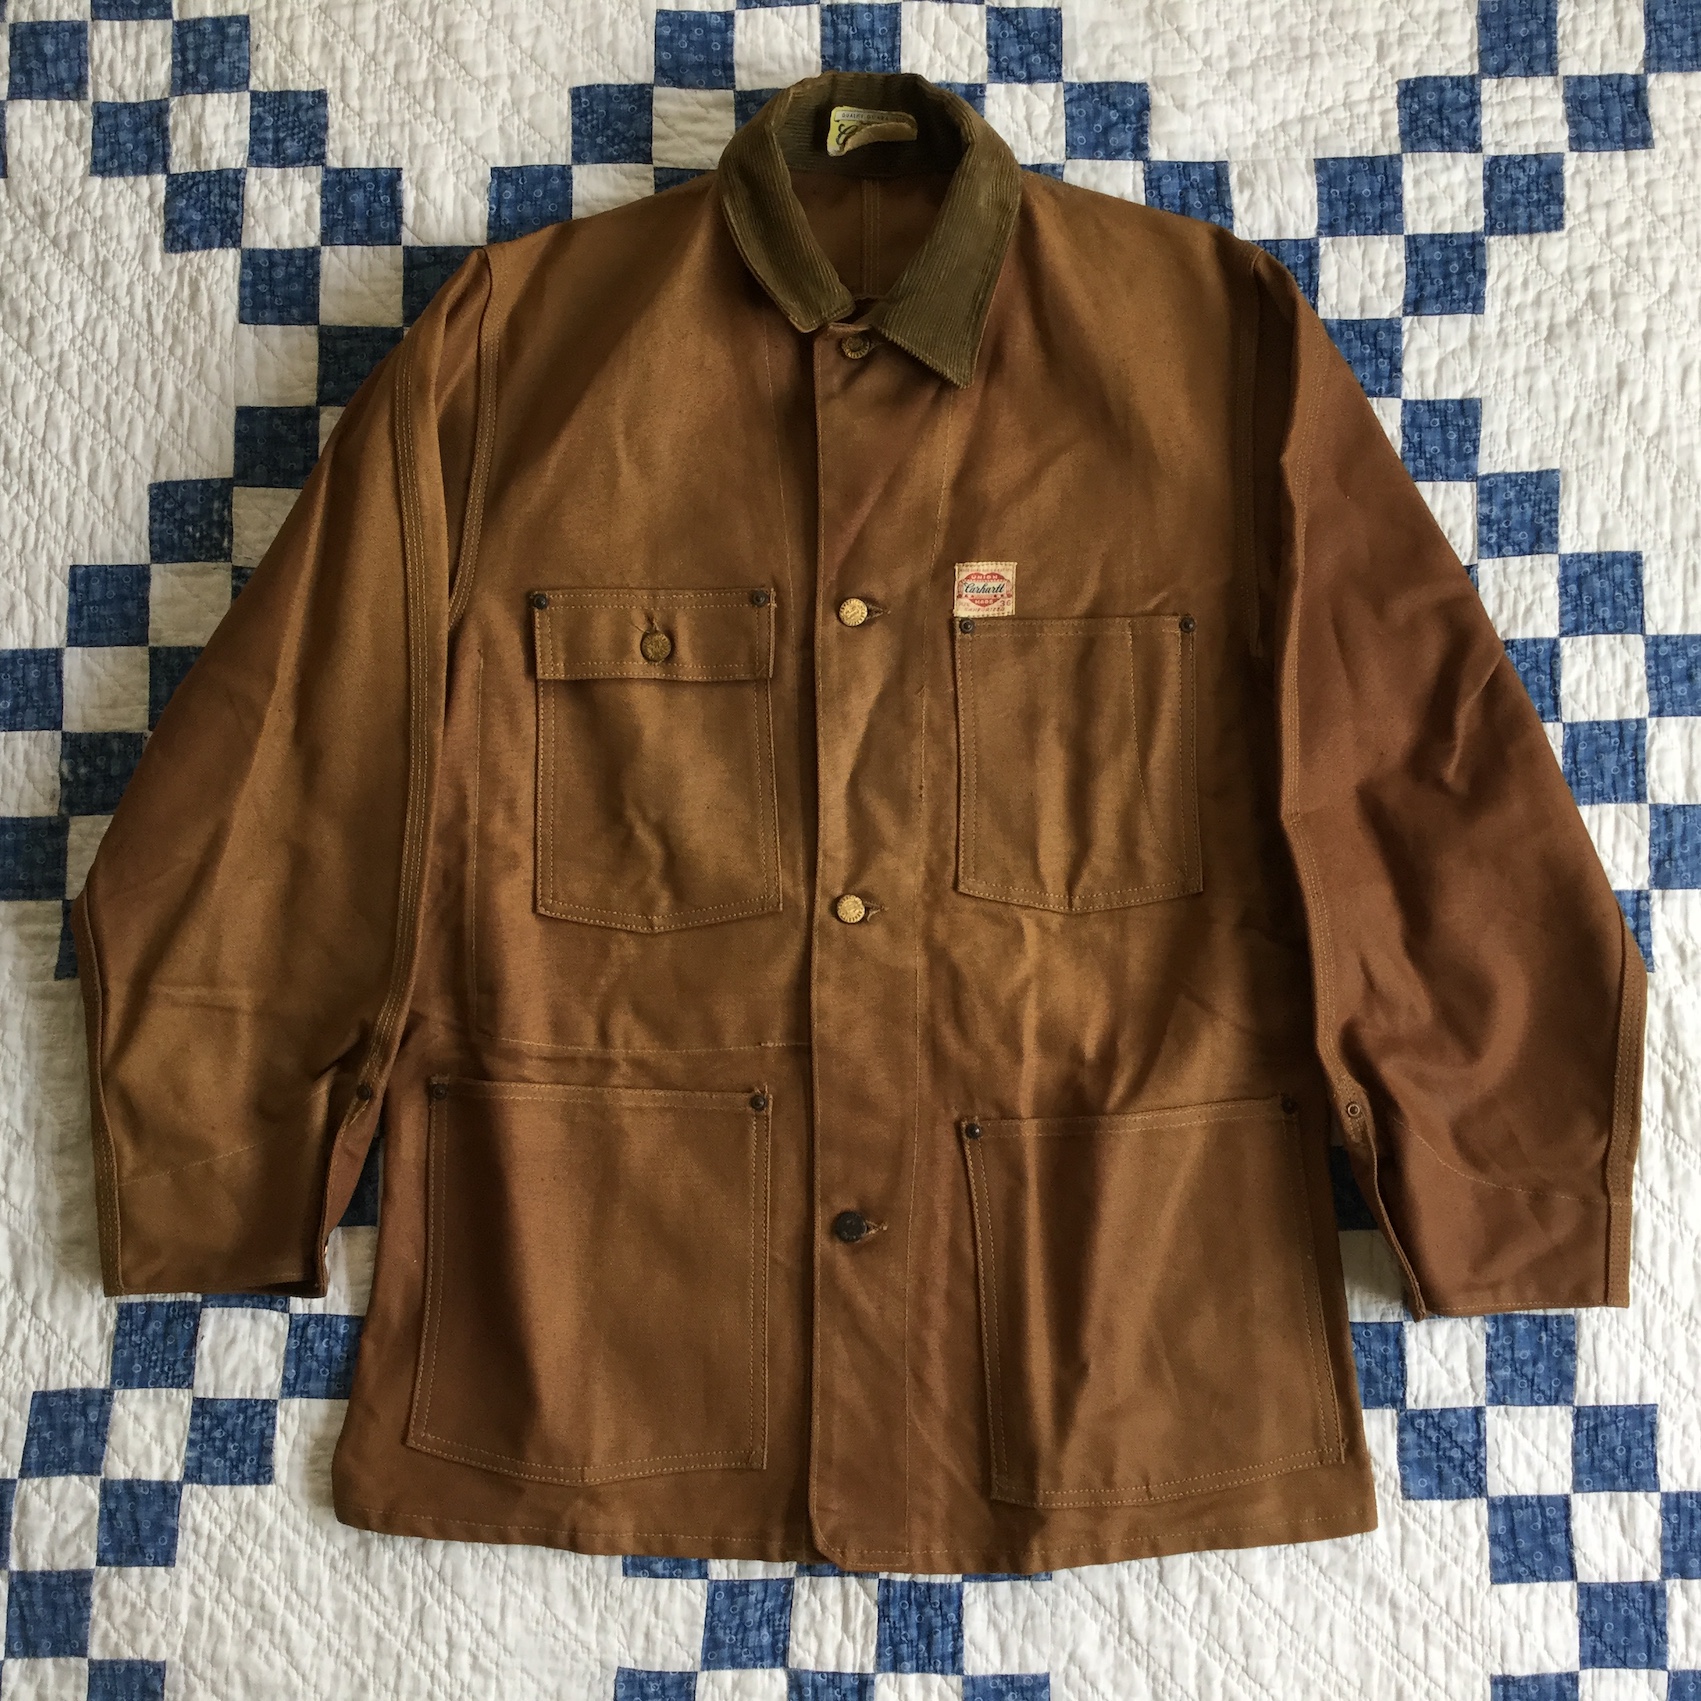 N.O.S. ~50's Carhartt duck chore jacket | Button Up Clothing